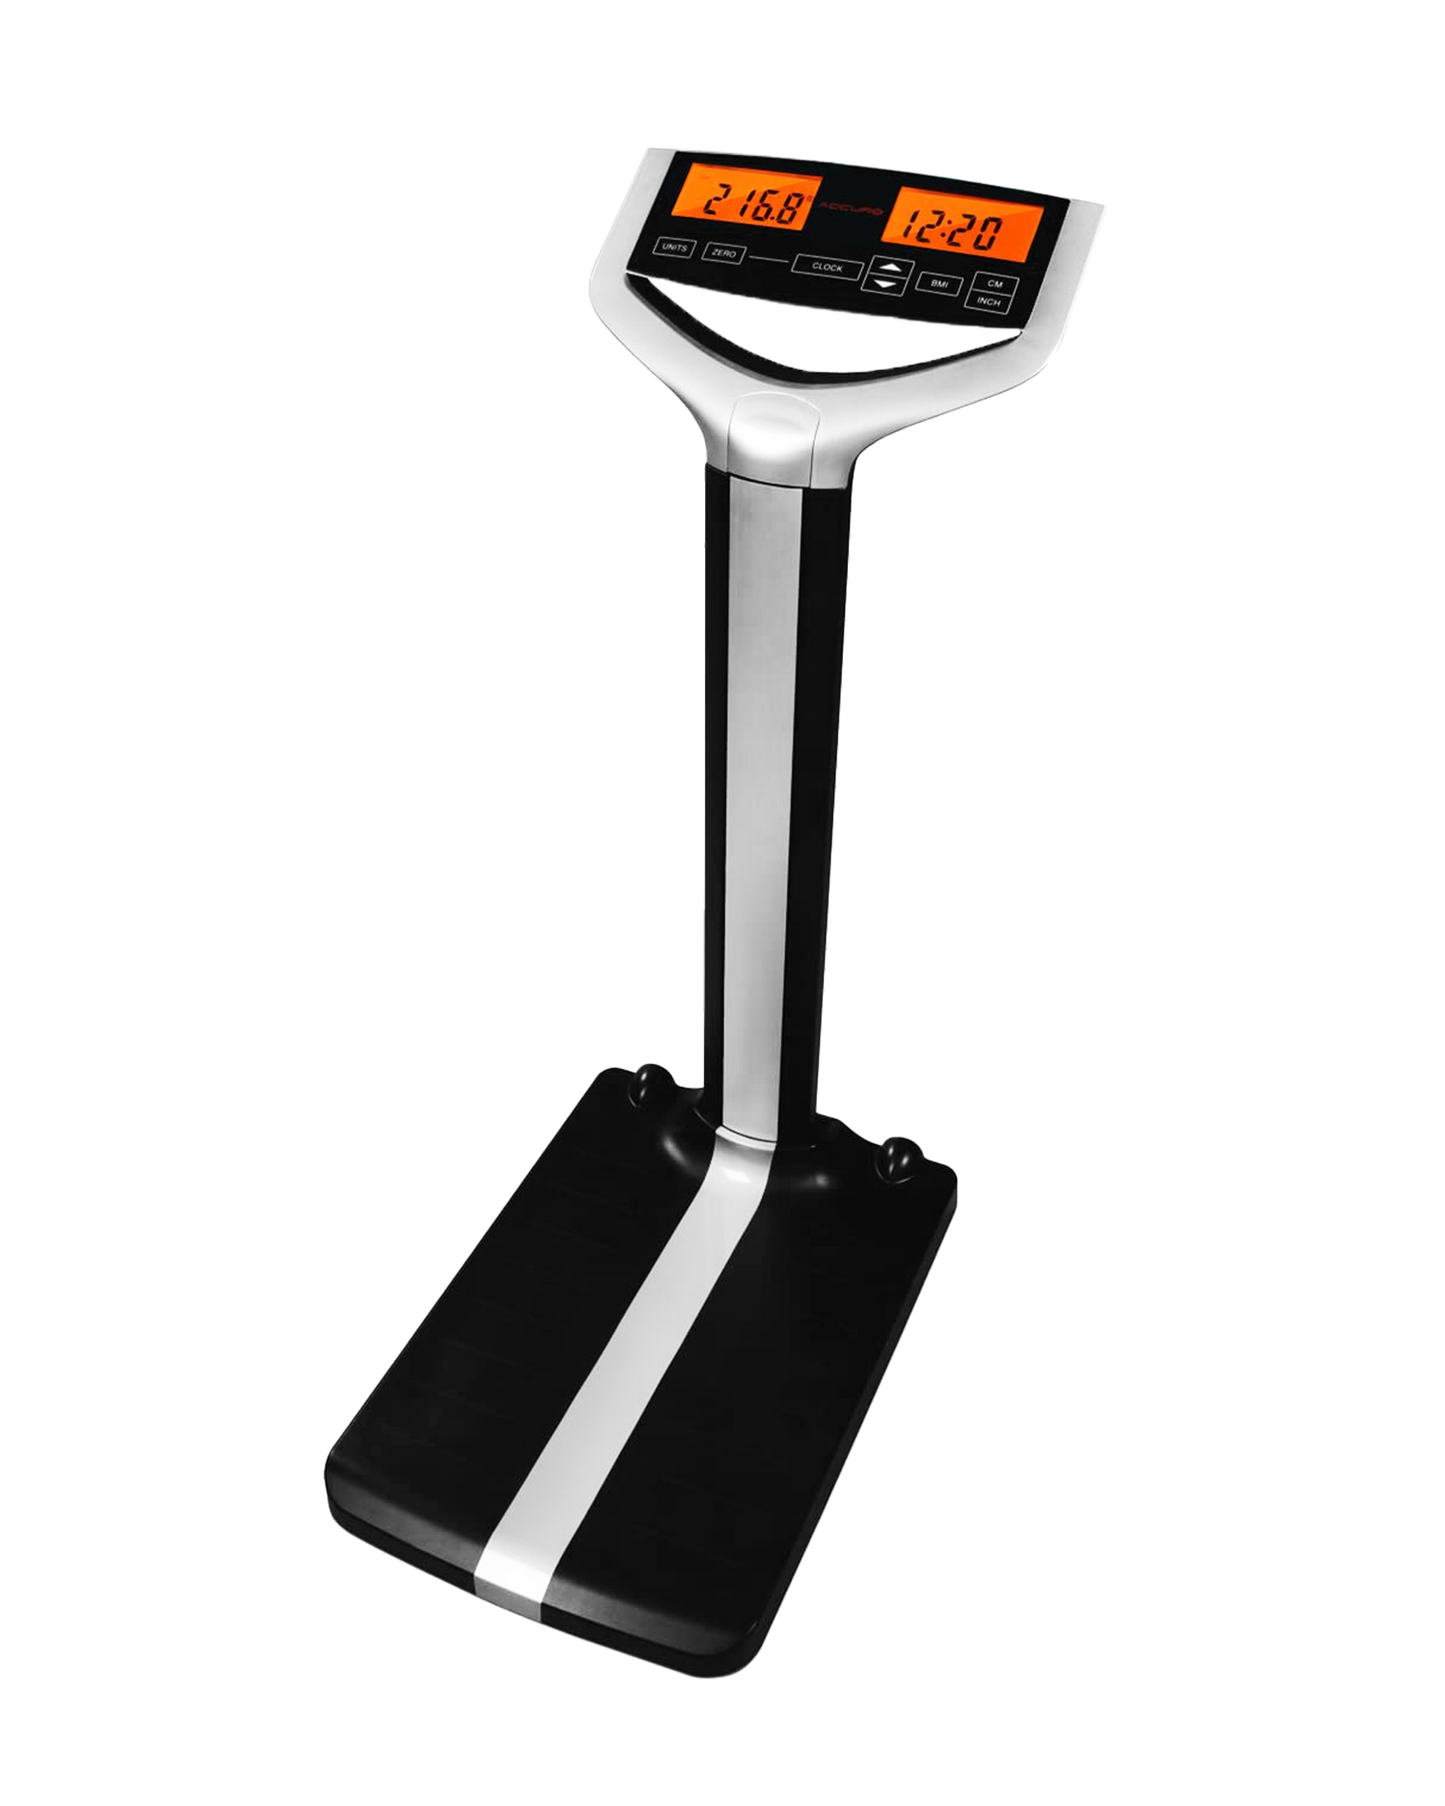 Accuro Waist Level Digital Scale with 500 lb Capacity and BMI Scale (D